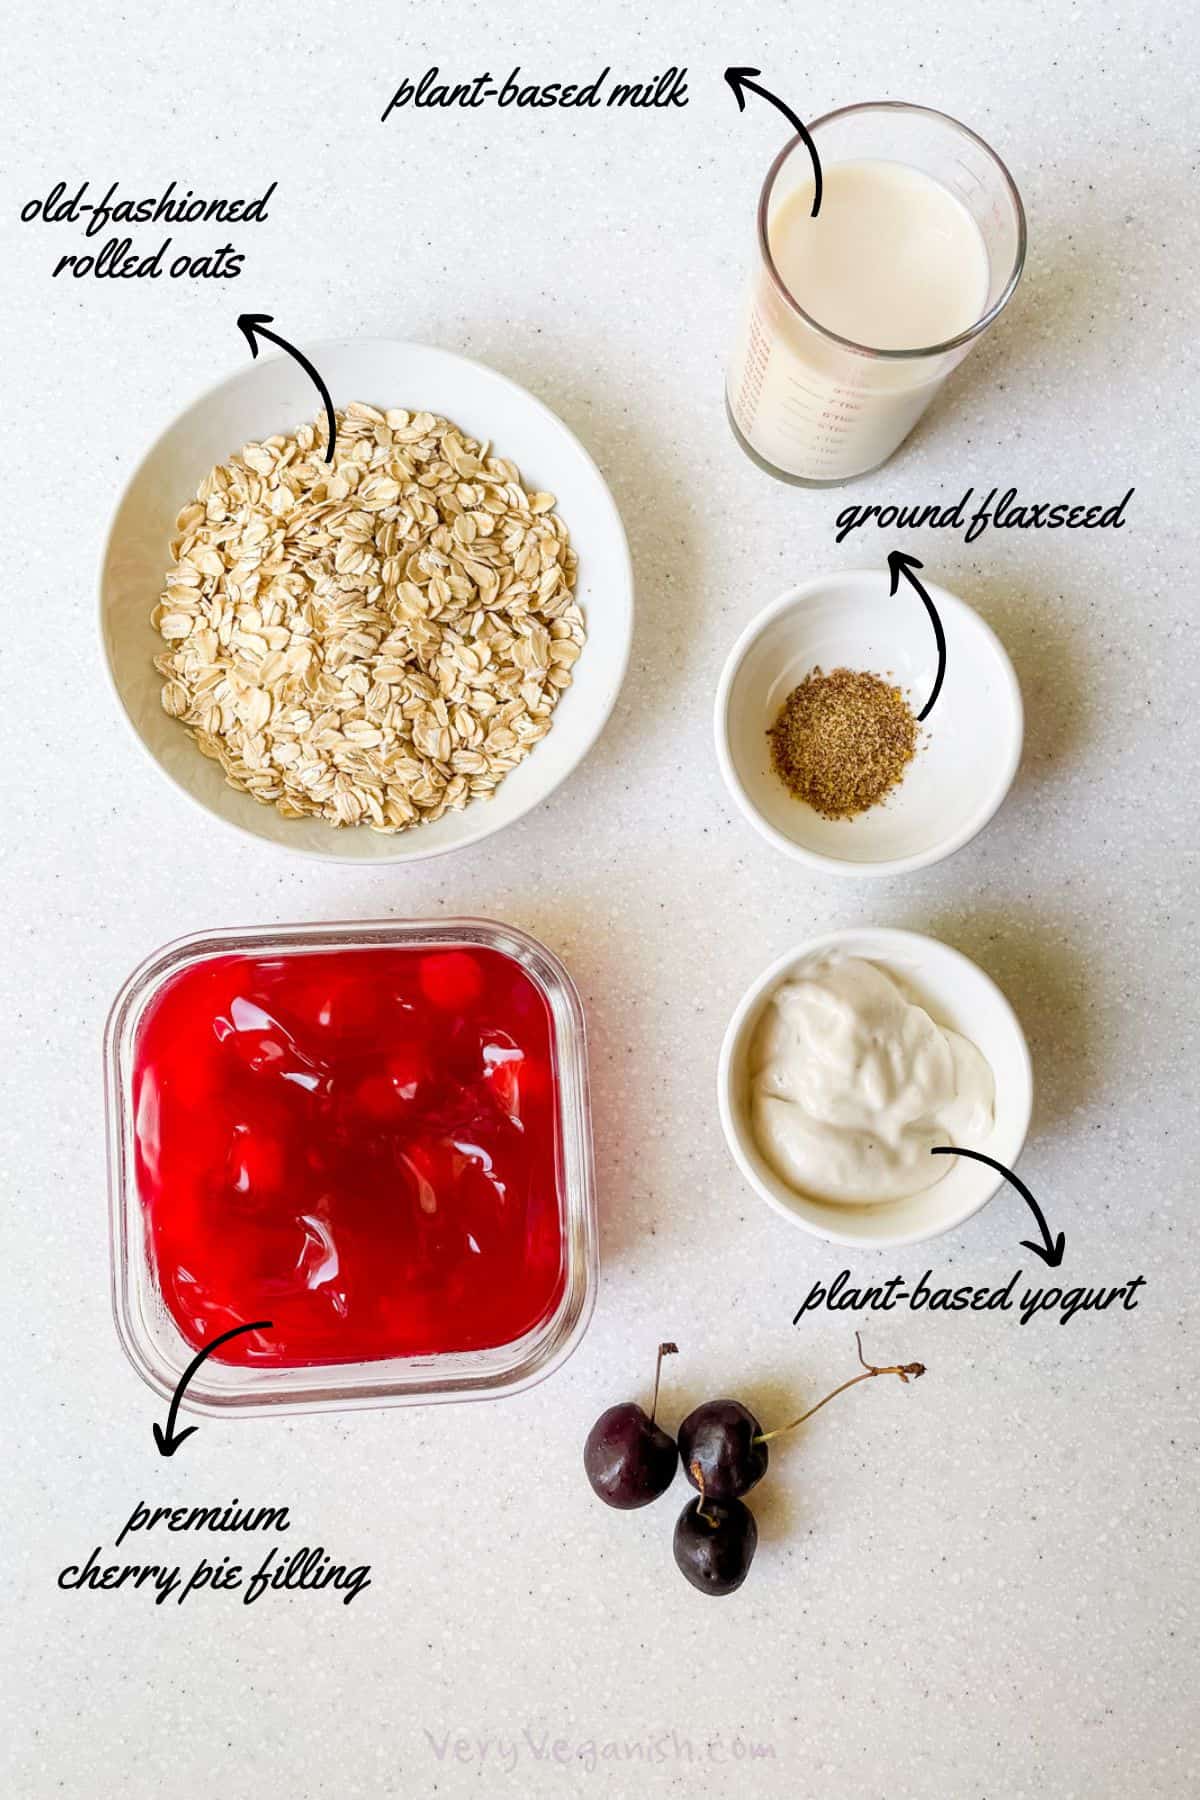 Ingredients for cherry pie overnight oats: rolled oats, plant-based milk, ground flaxseed, plant-based yogurt, premium cherry pie filling